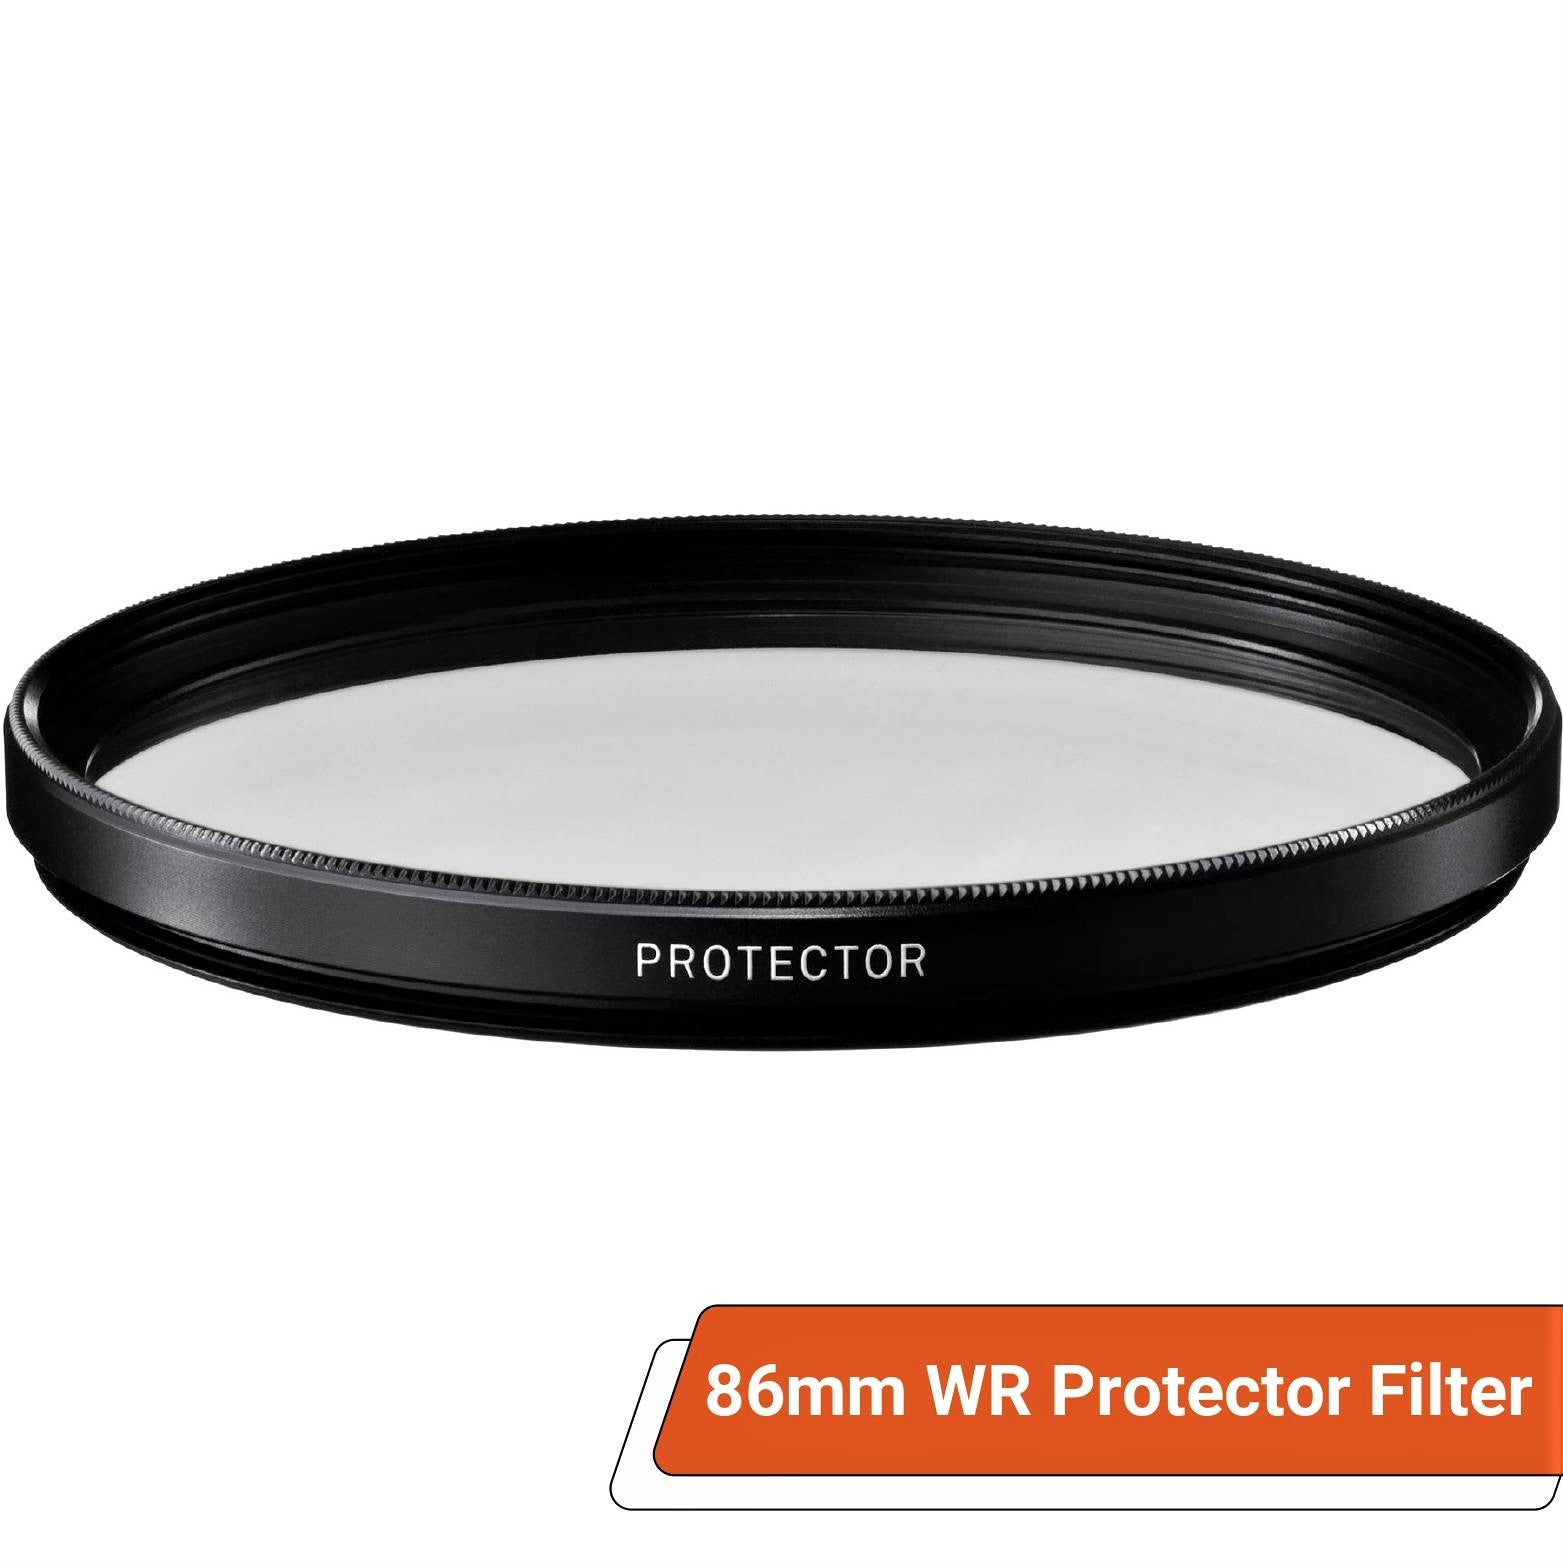 Sigma 86mm WR (Water Repellent) Protector Filter